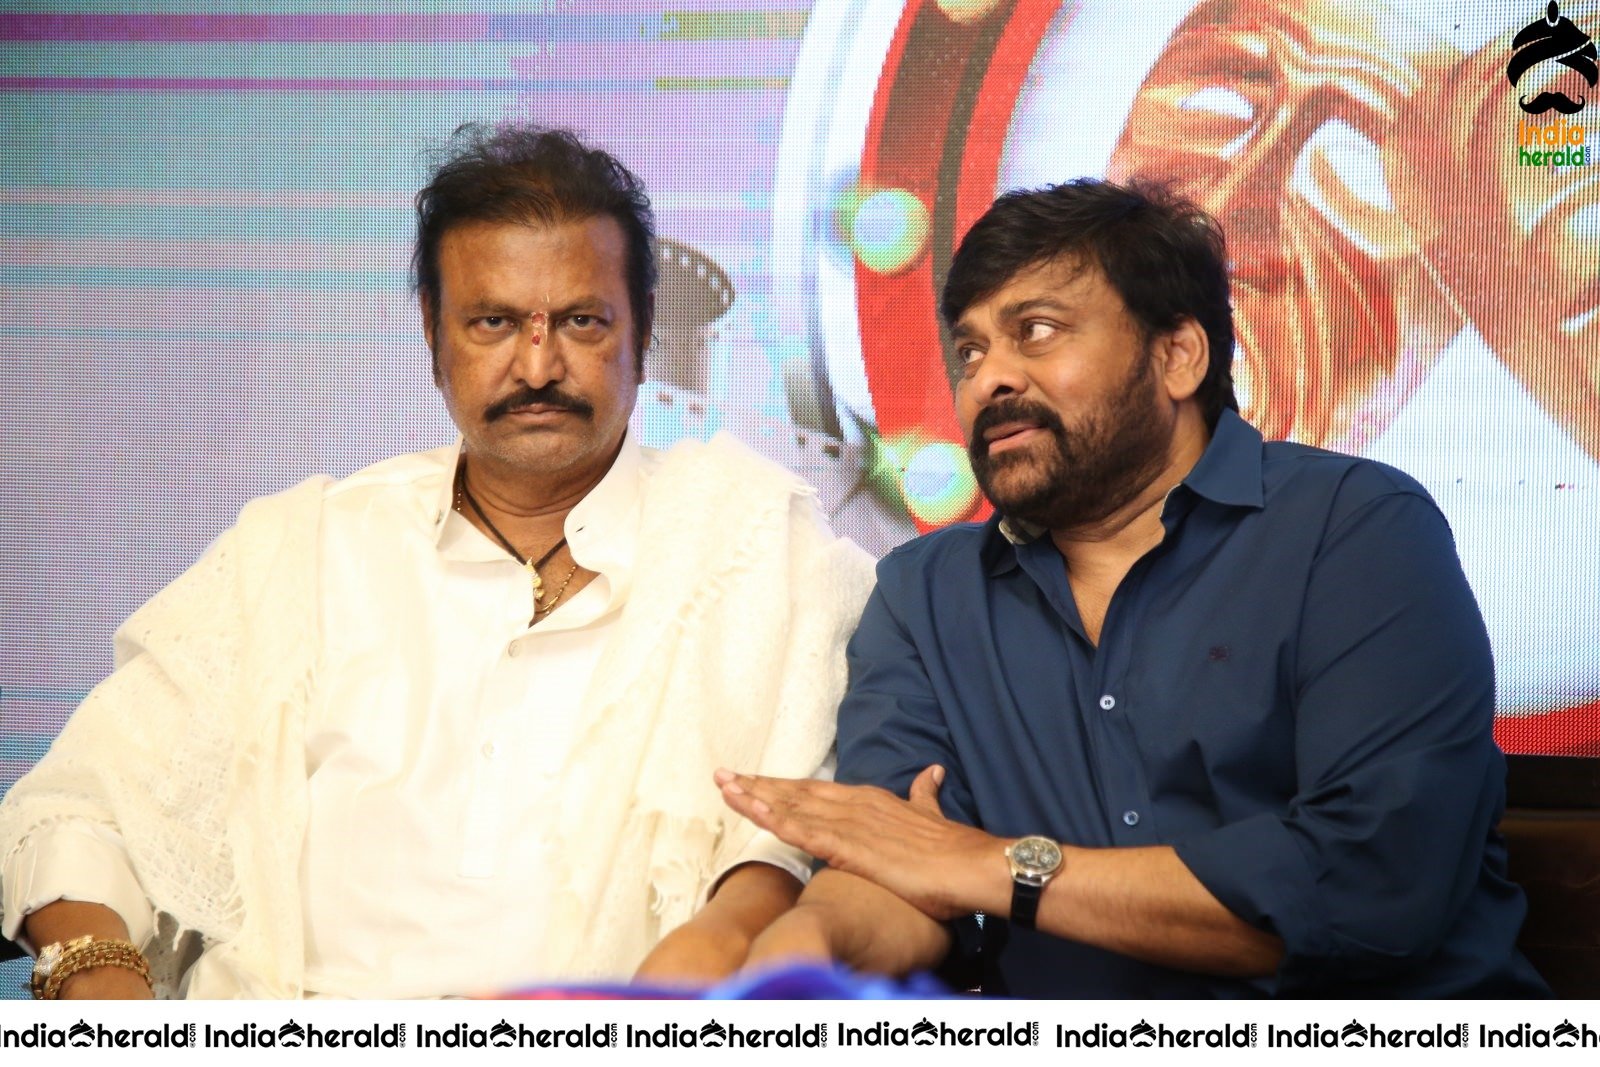 Some Candid Clicks of Actor Chiranjeevi during MAA 2020 launch Set 1